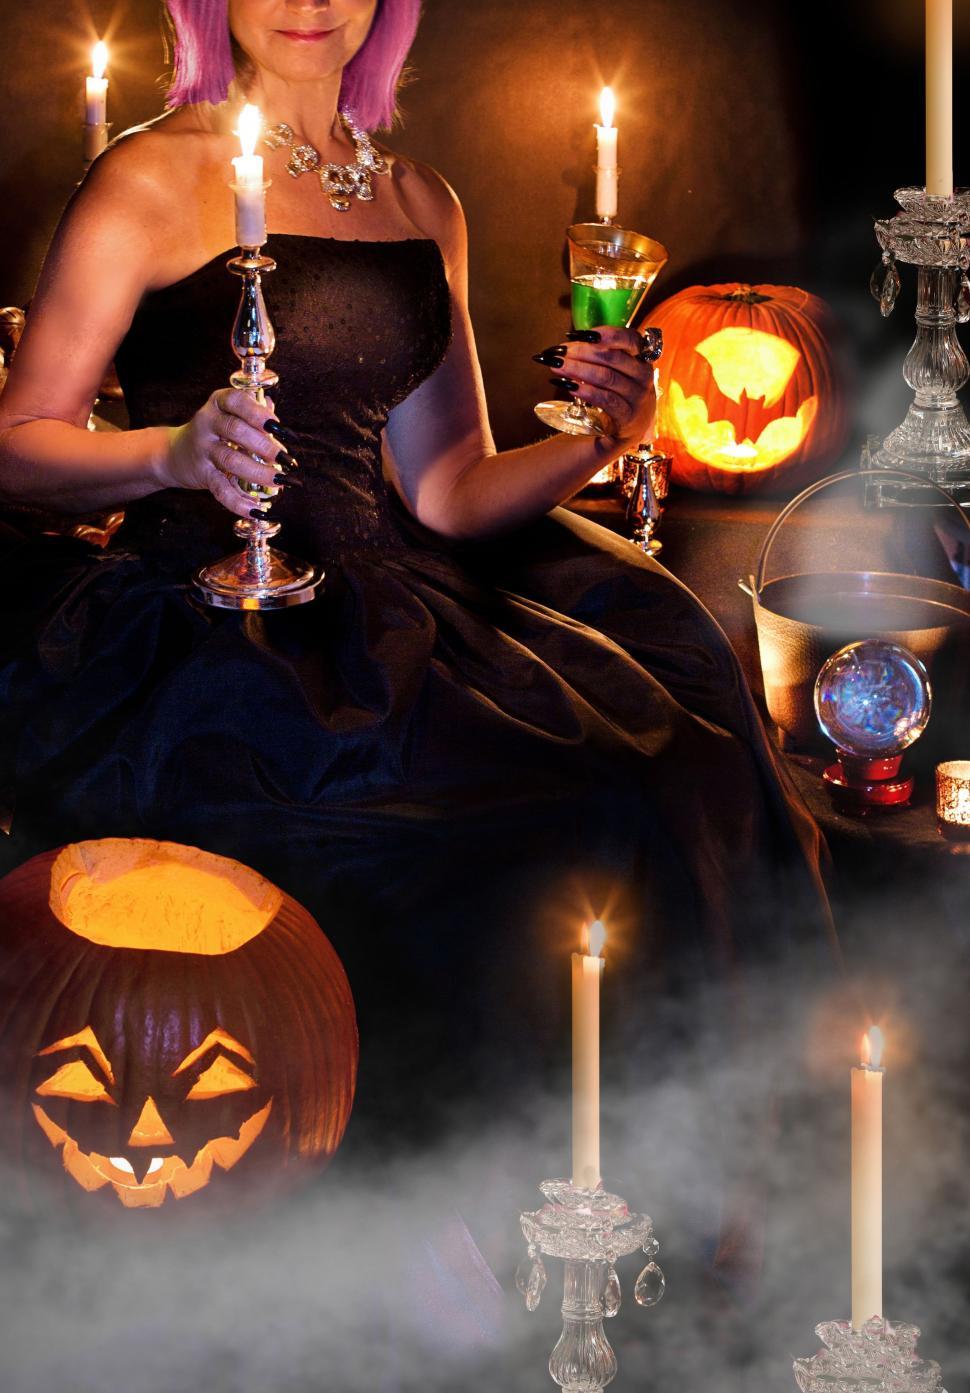 Free Image of Woman With Candles And Halloween Pumpkins 